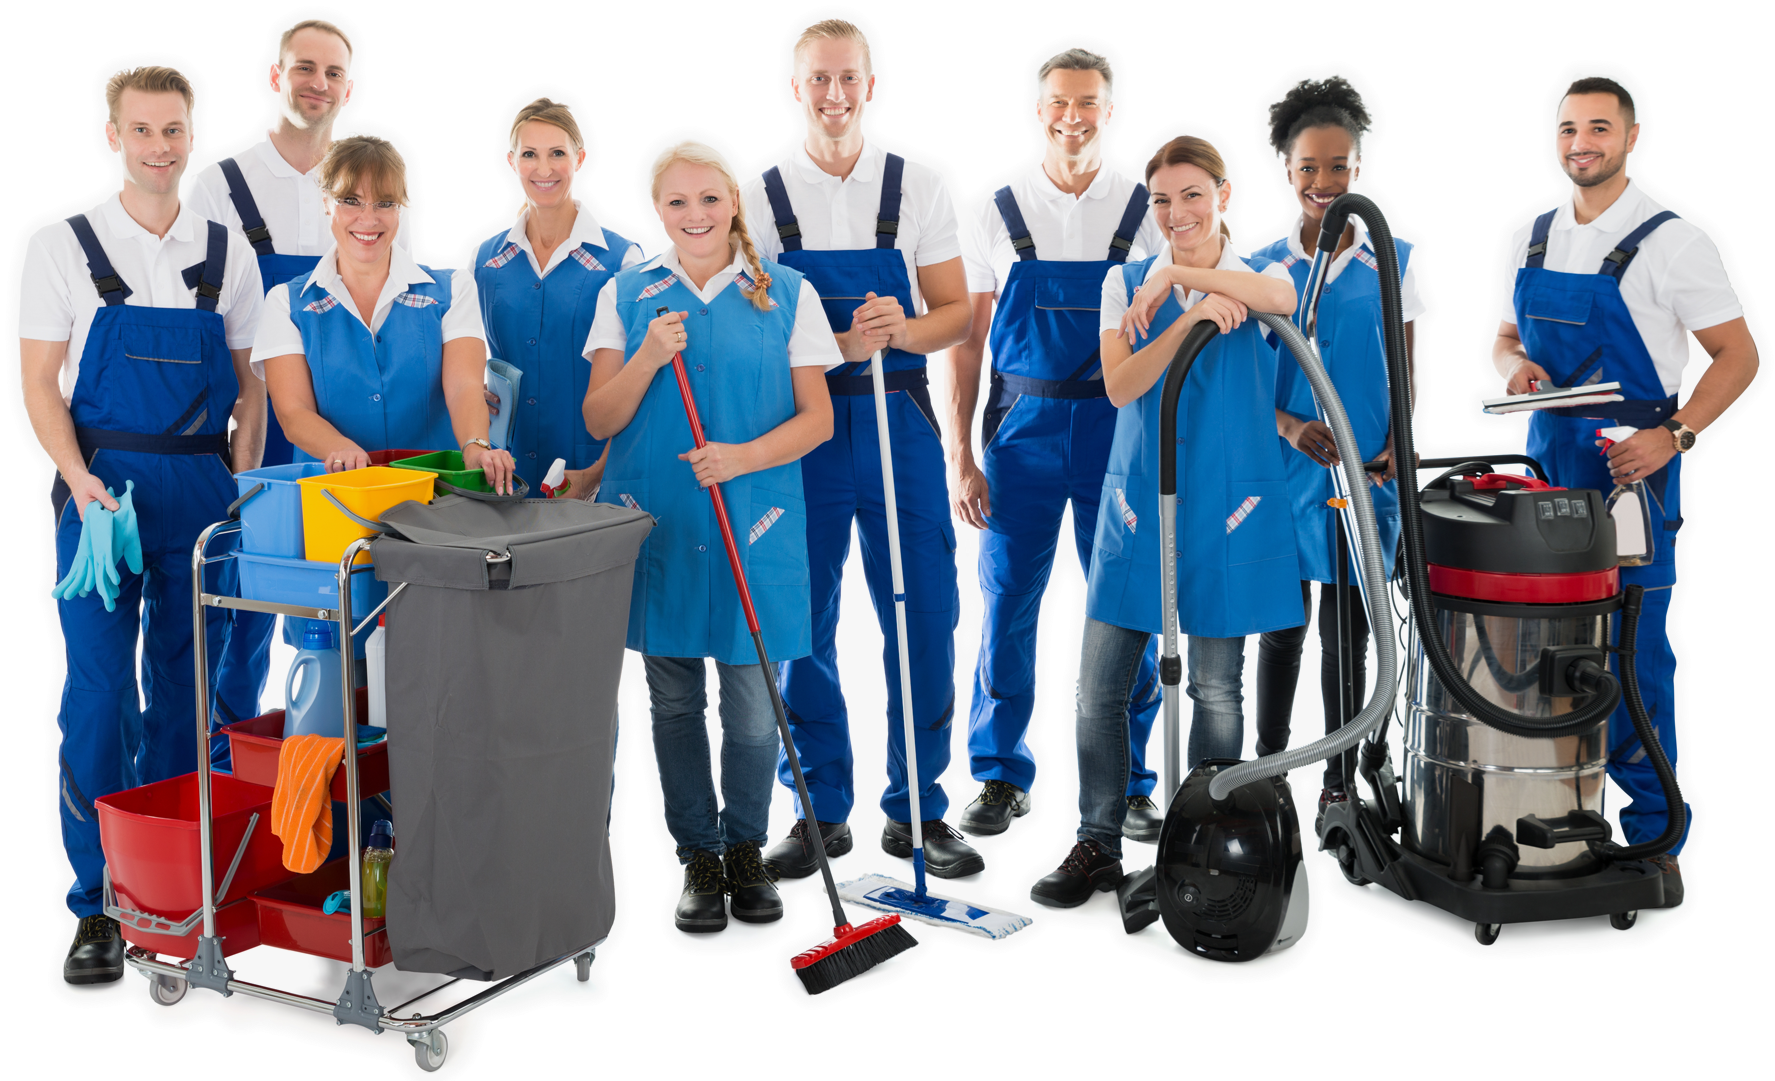 Cleaning Services - Cleaning Crew (1809x1104)